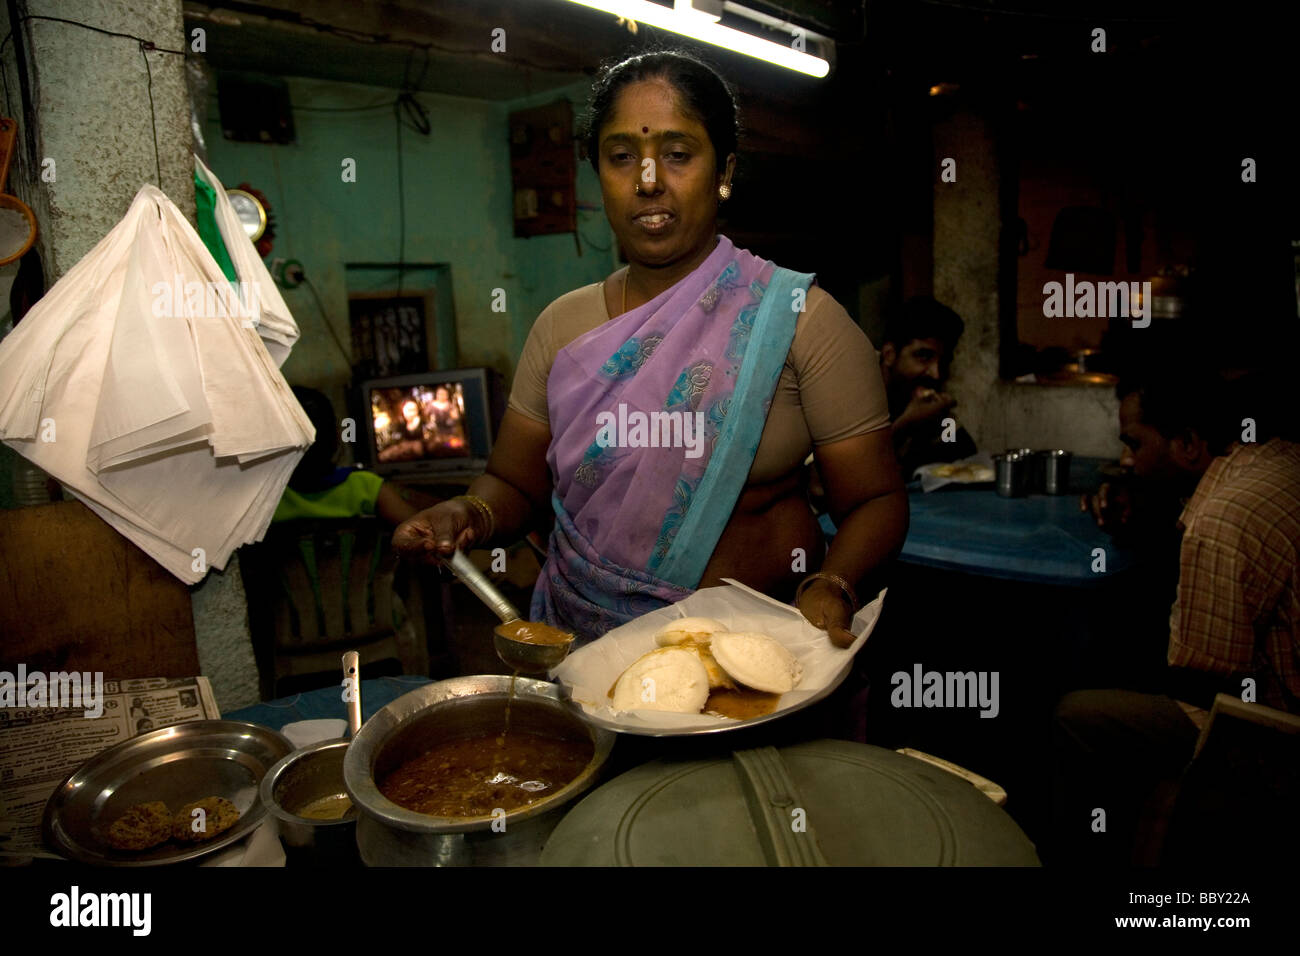 A roadside restaurant close to Chennai, India. The simple restaurant serves good, basic food. The woman serves idly. Stock Photo